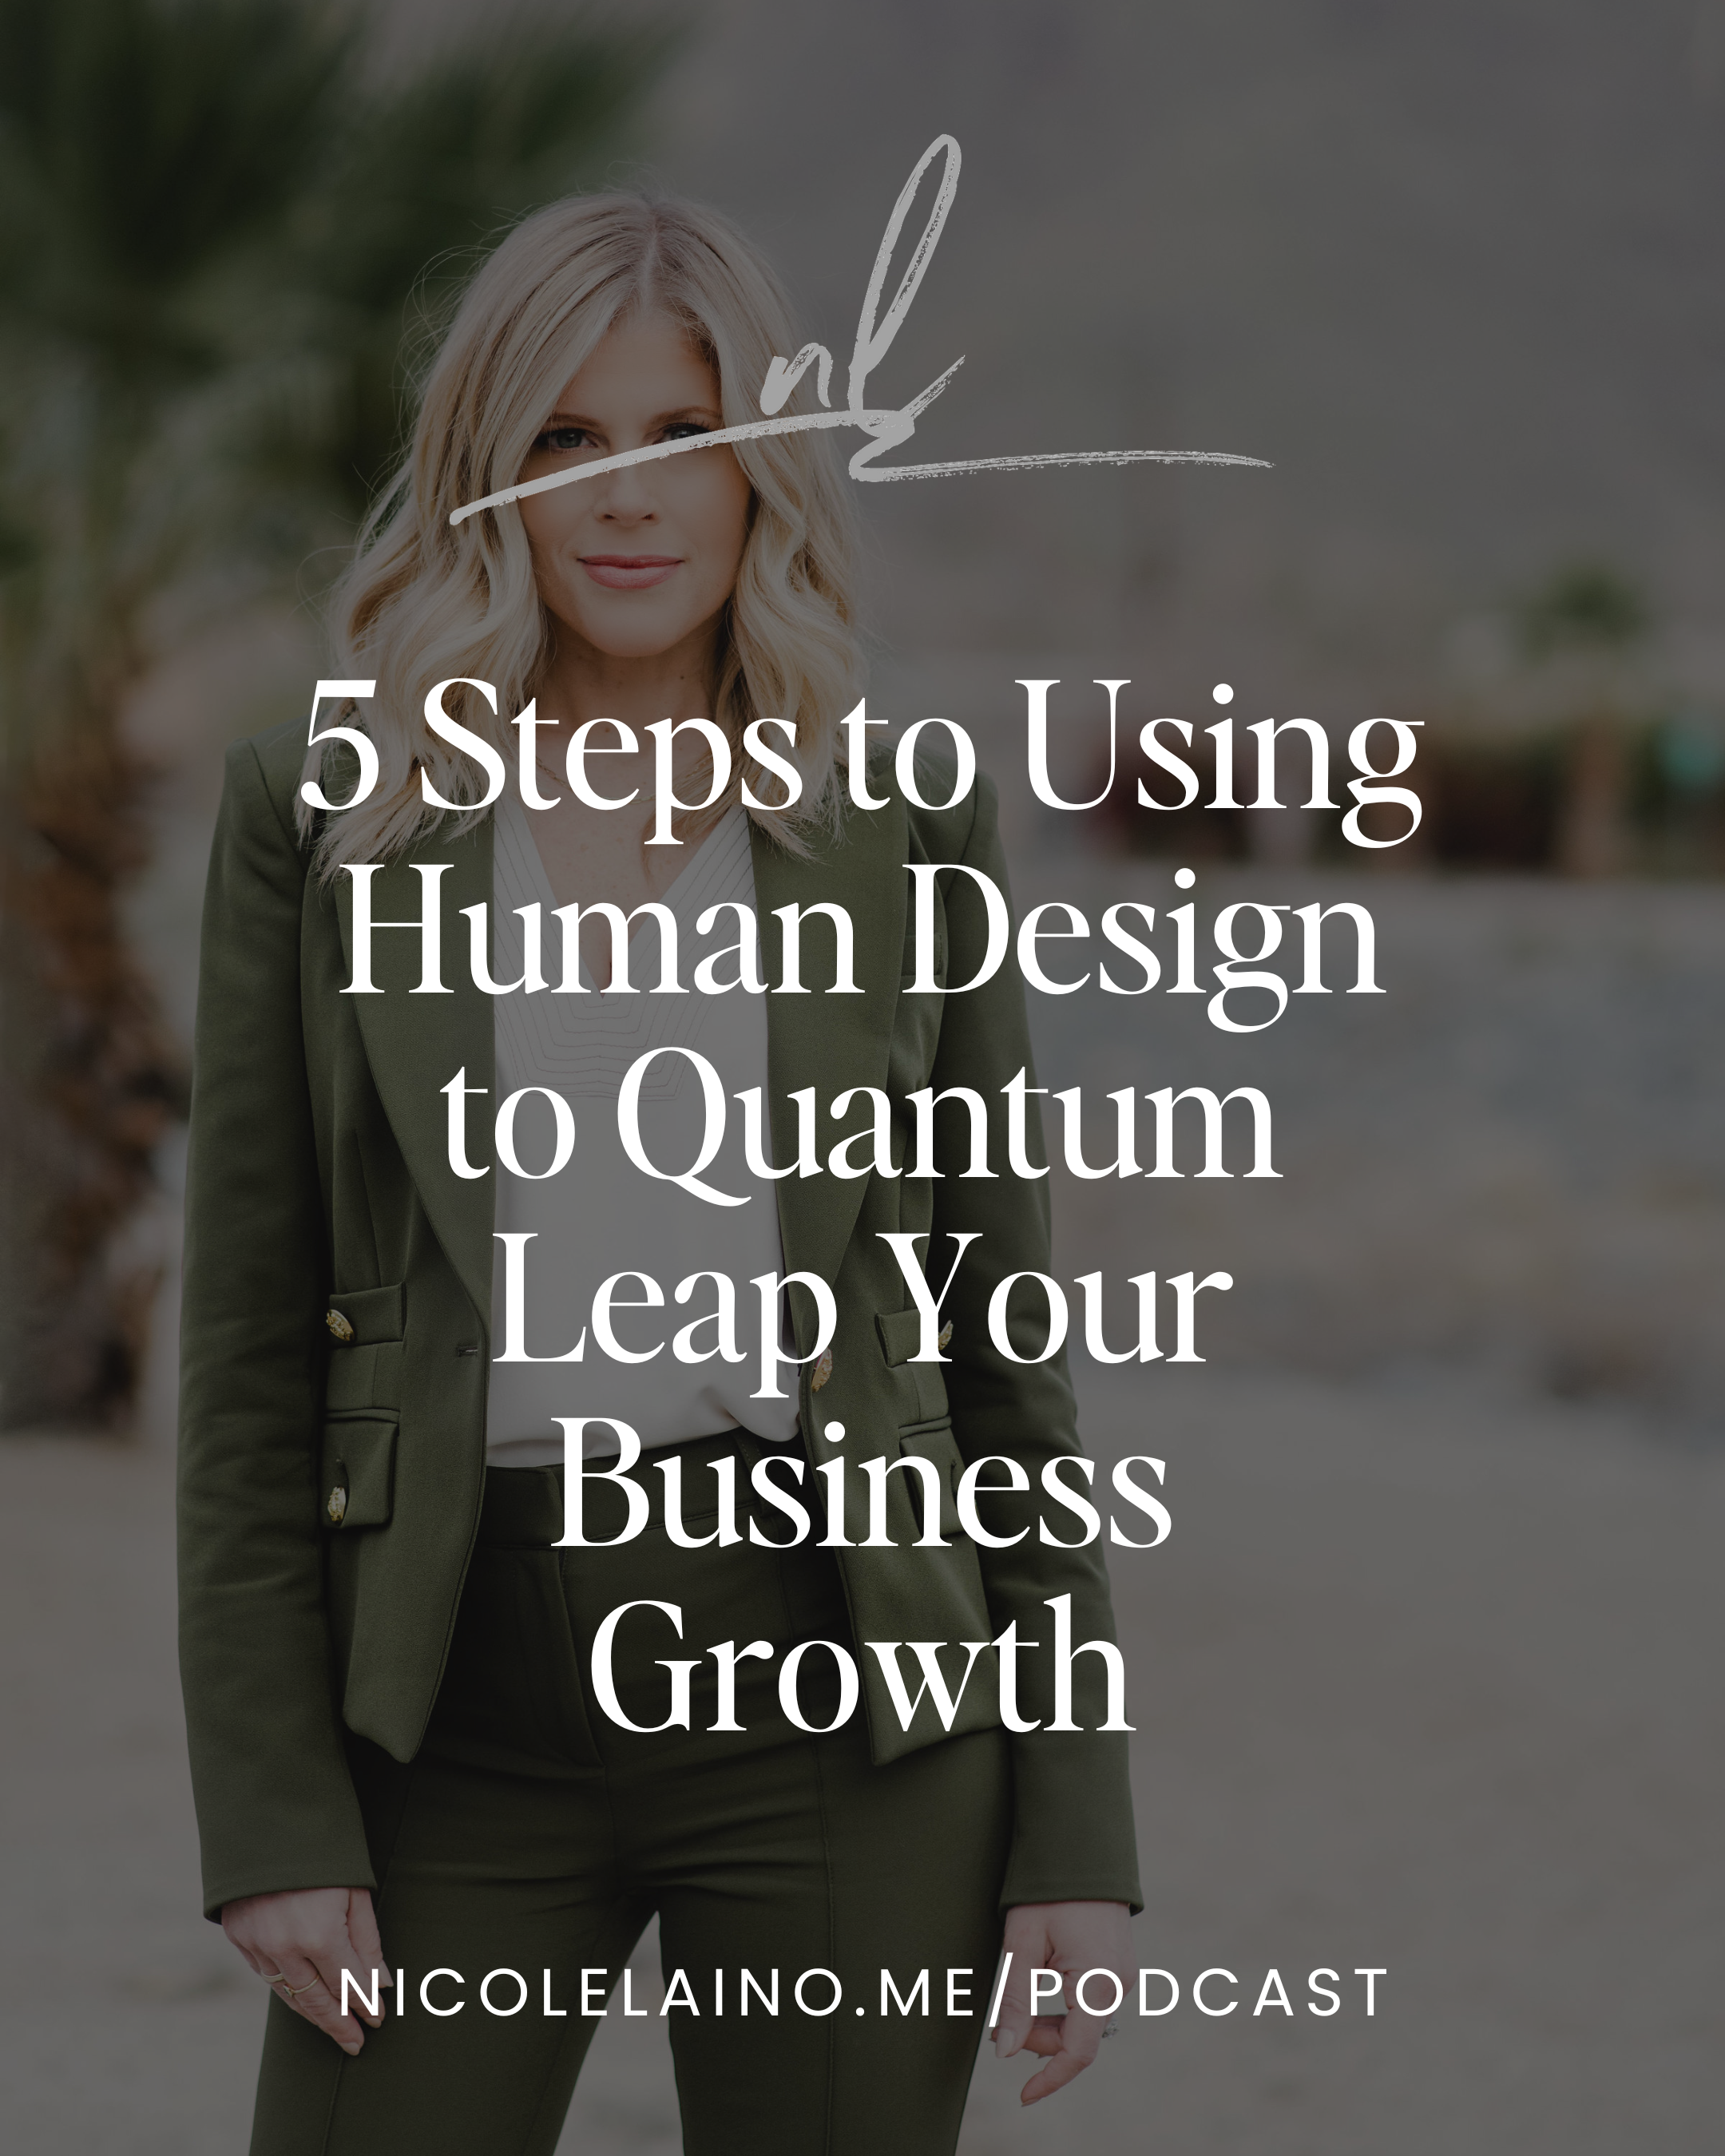 5 Steps to Using Human Design to Quantum Leap Your Business Growth